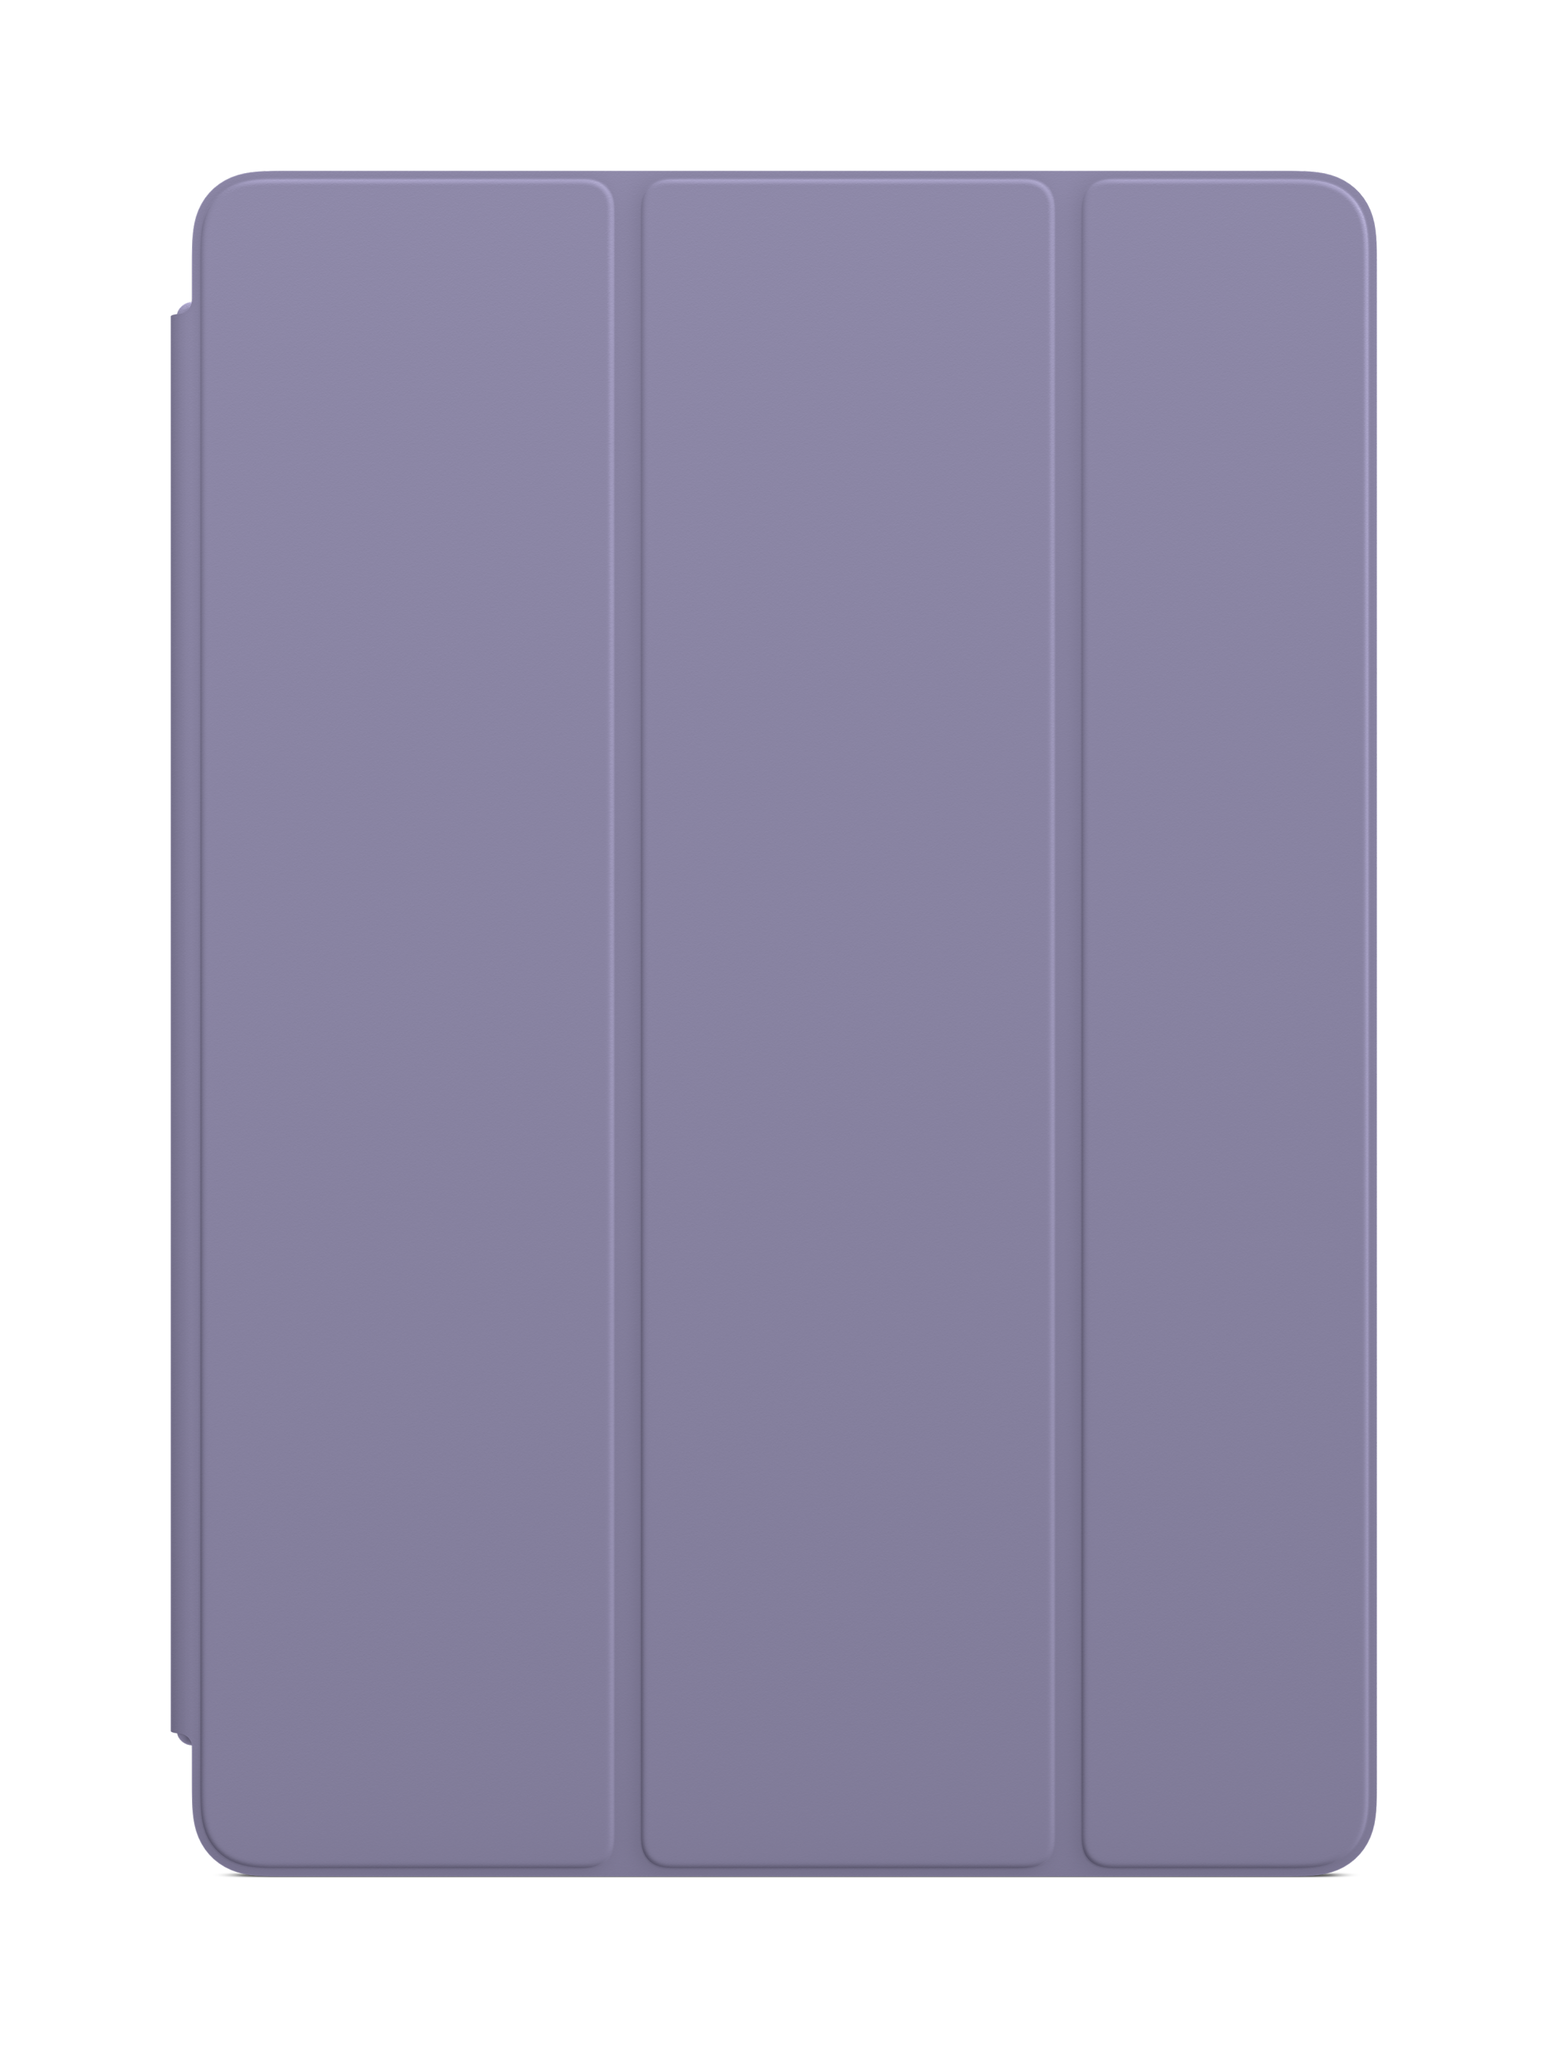 Apple Smart Cover Voor Ipad (10.5-inch) - English Lavender